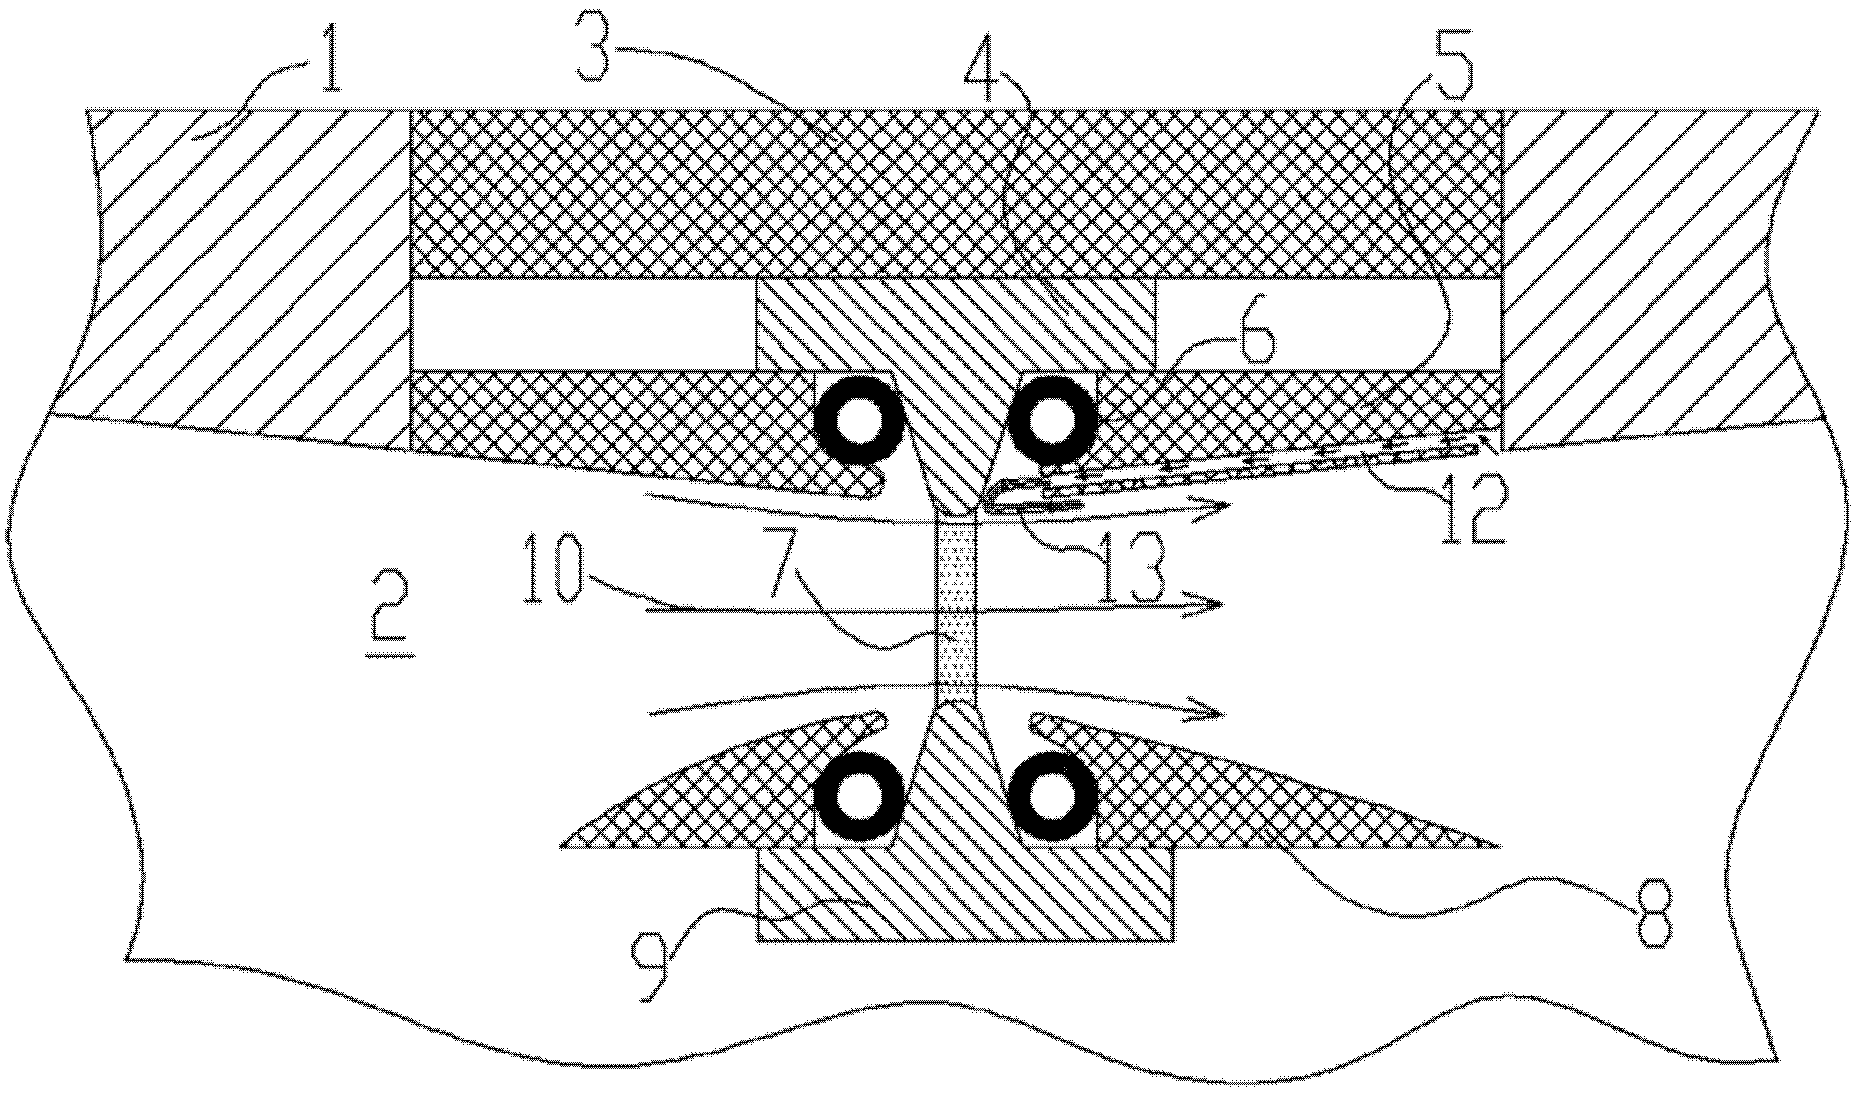 Discharging chamber with micro-channel structure and gas laser device